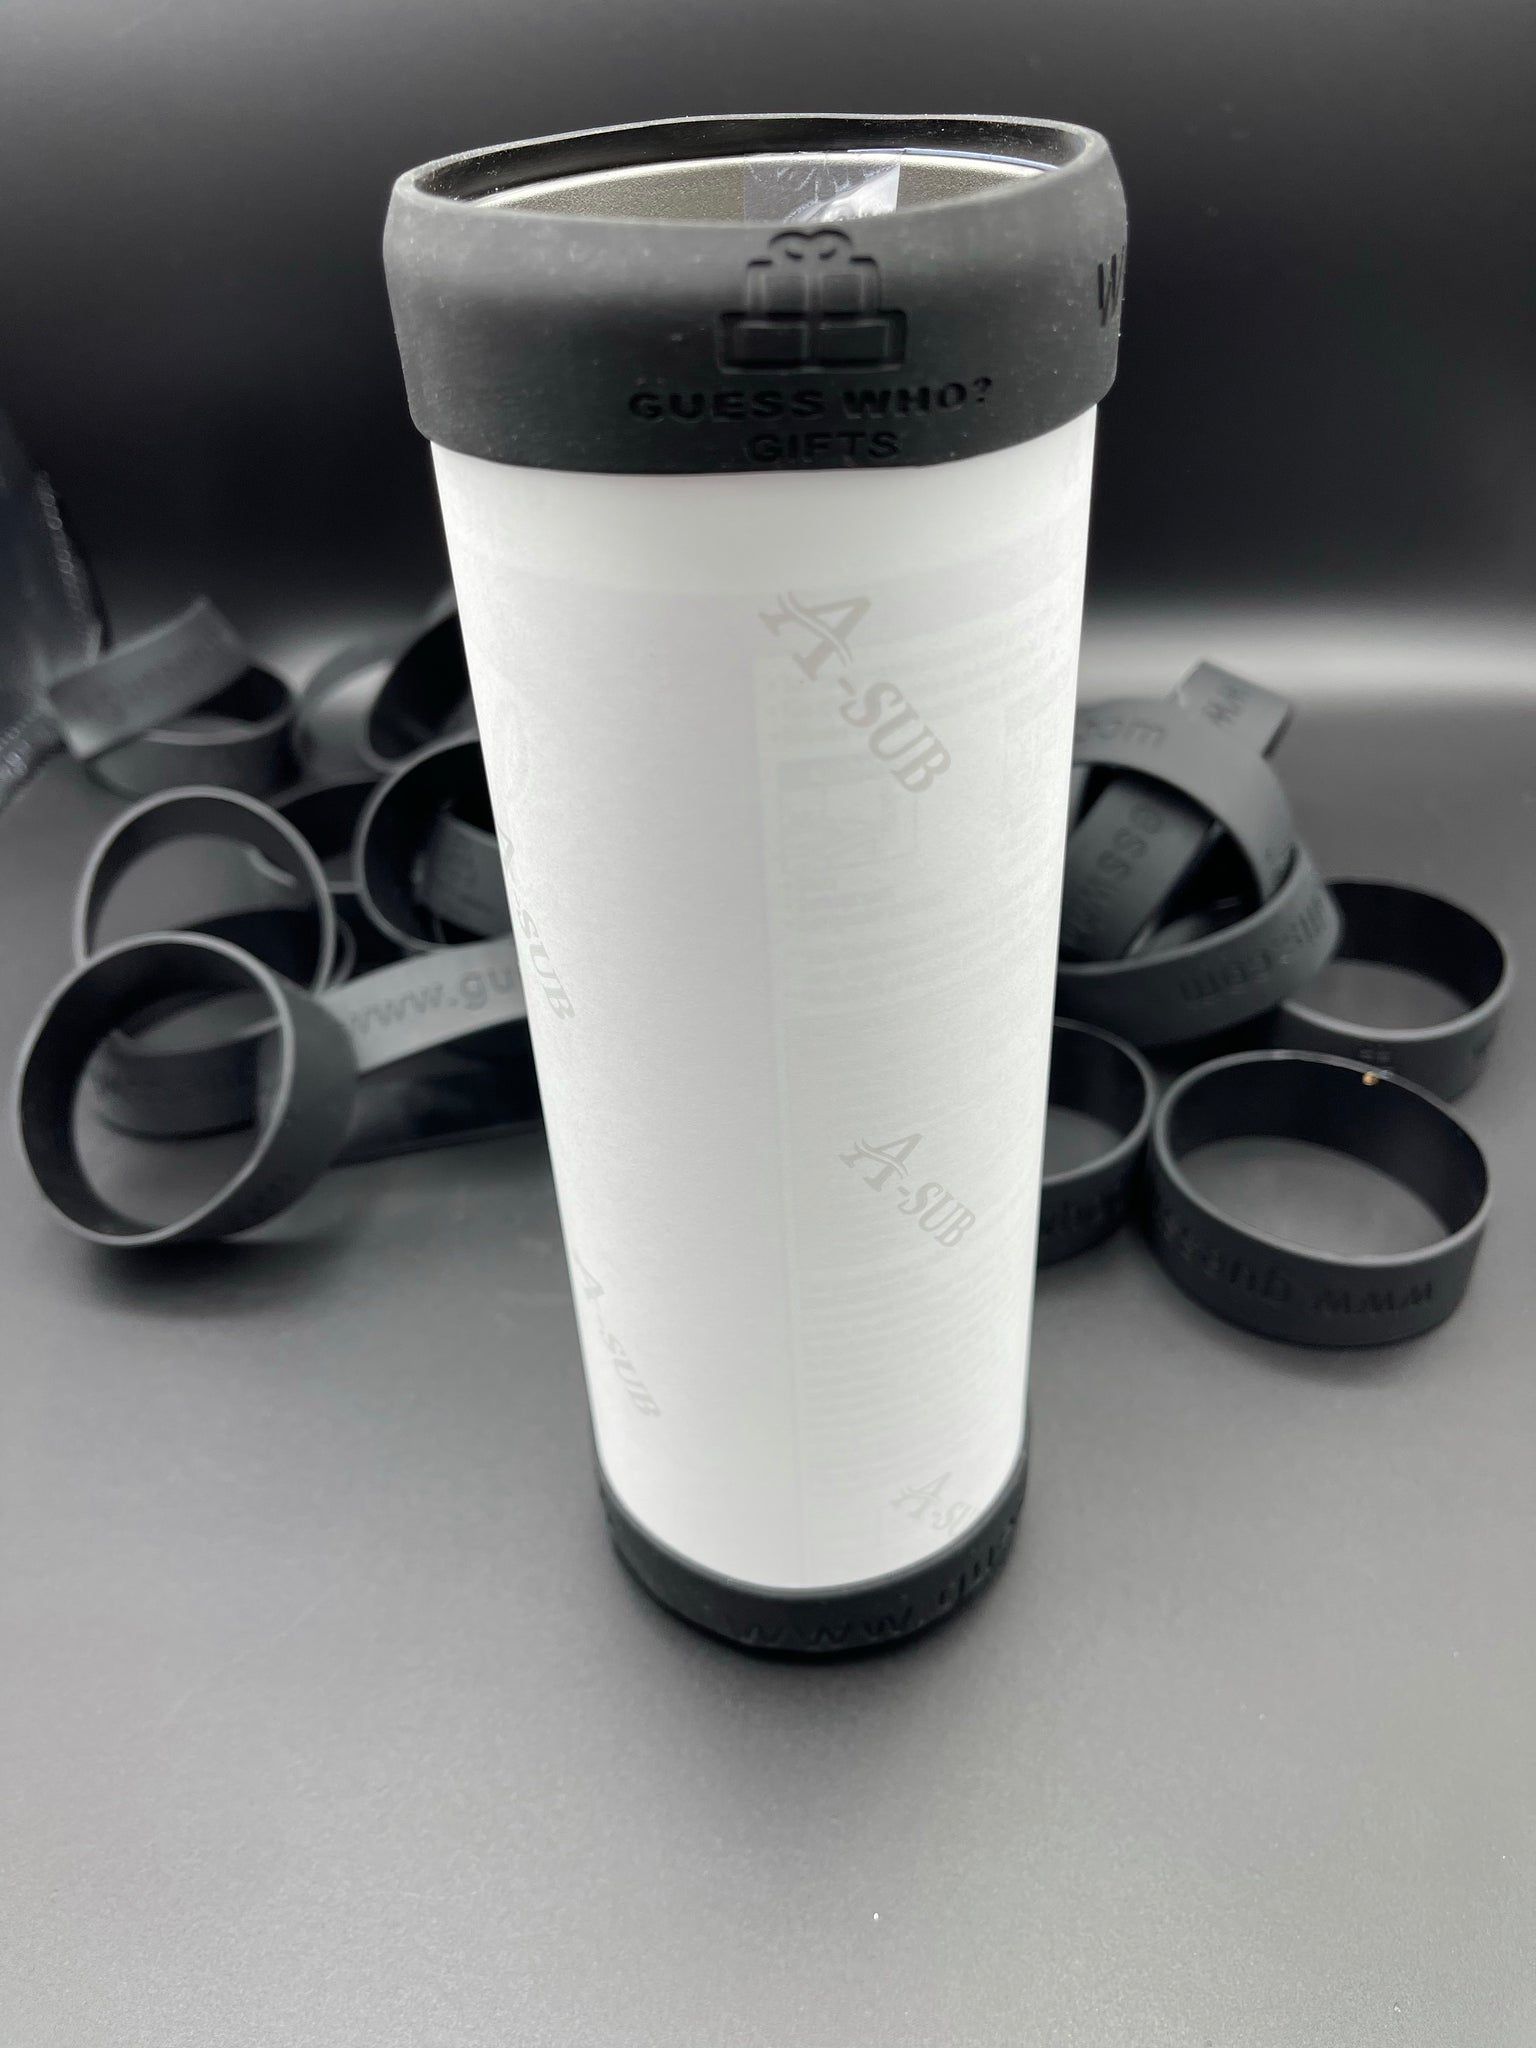 Silicone Bands For Sublimation Cups 10pcs Alternative Shrink Wrap For  Sublimation S Prevent Ghosting Sublimation Supplies